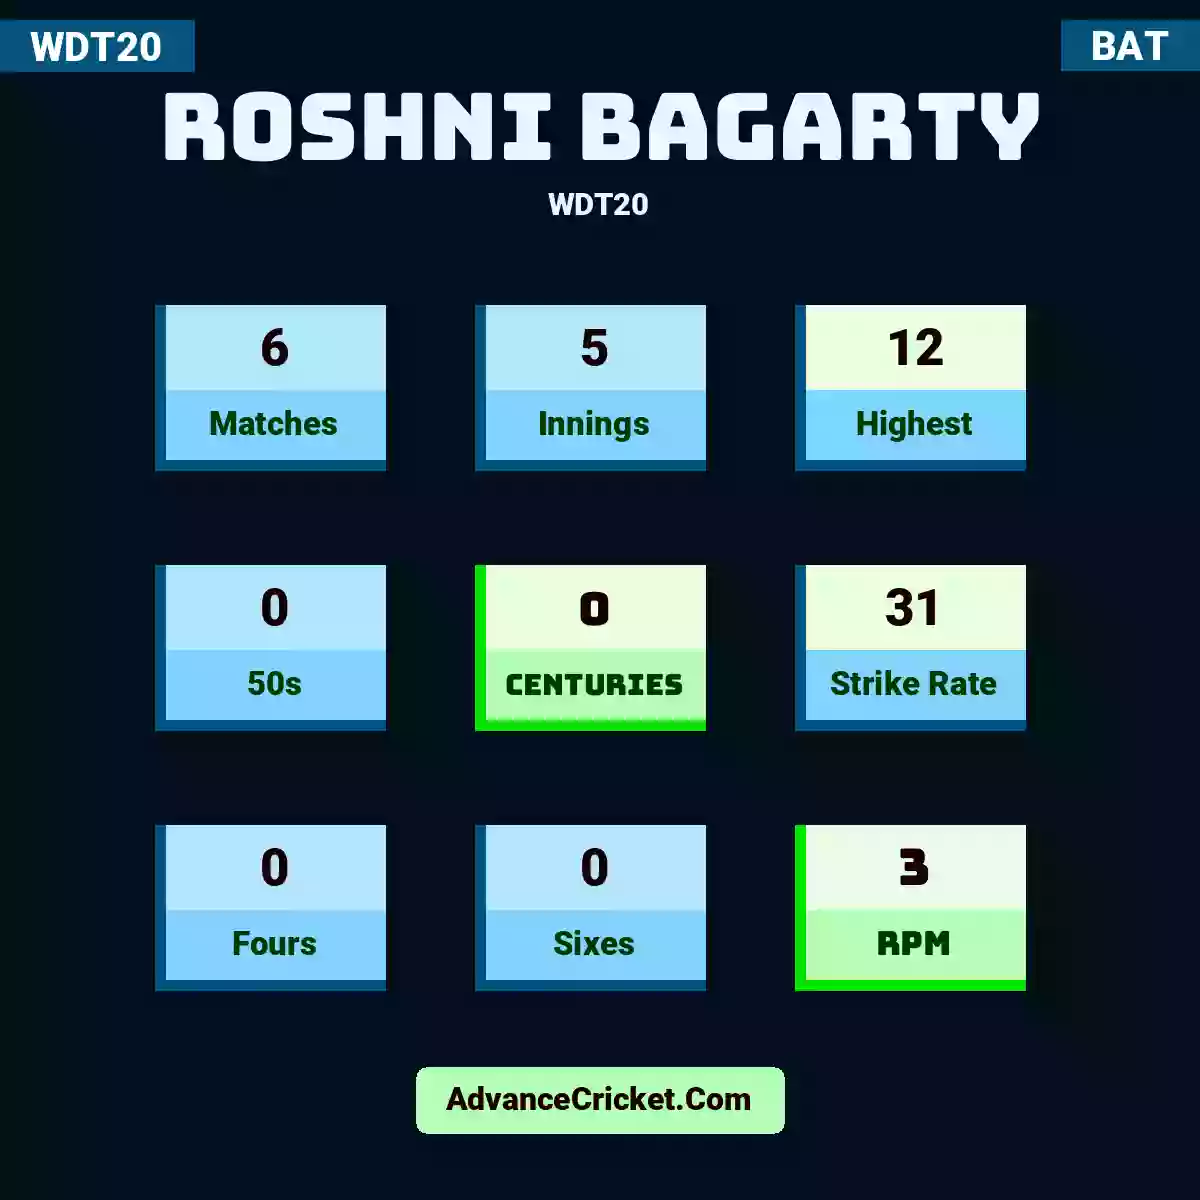 Roshni Bagarty WDT20 , Roshni Bagarty played 6 matches, scored 12 runs as highest, 0 half-centuries, and 0 centuries, with a strike rate of 31. R.Bagarty hit 0 fours and 0 sixes, with an RPM of 3.